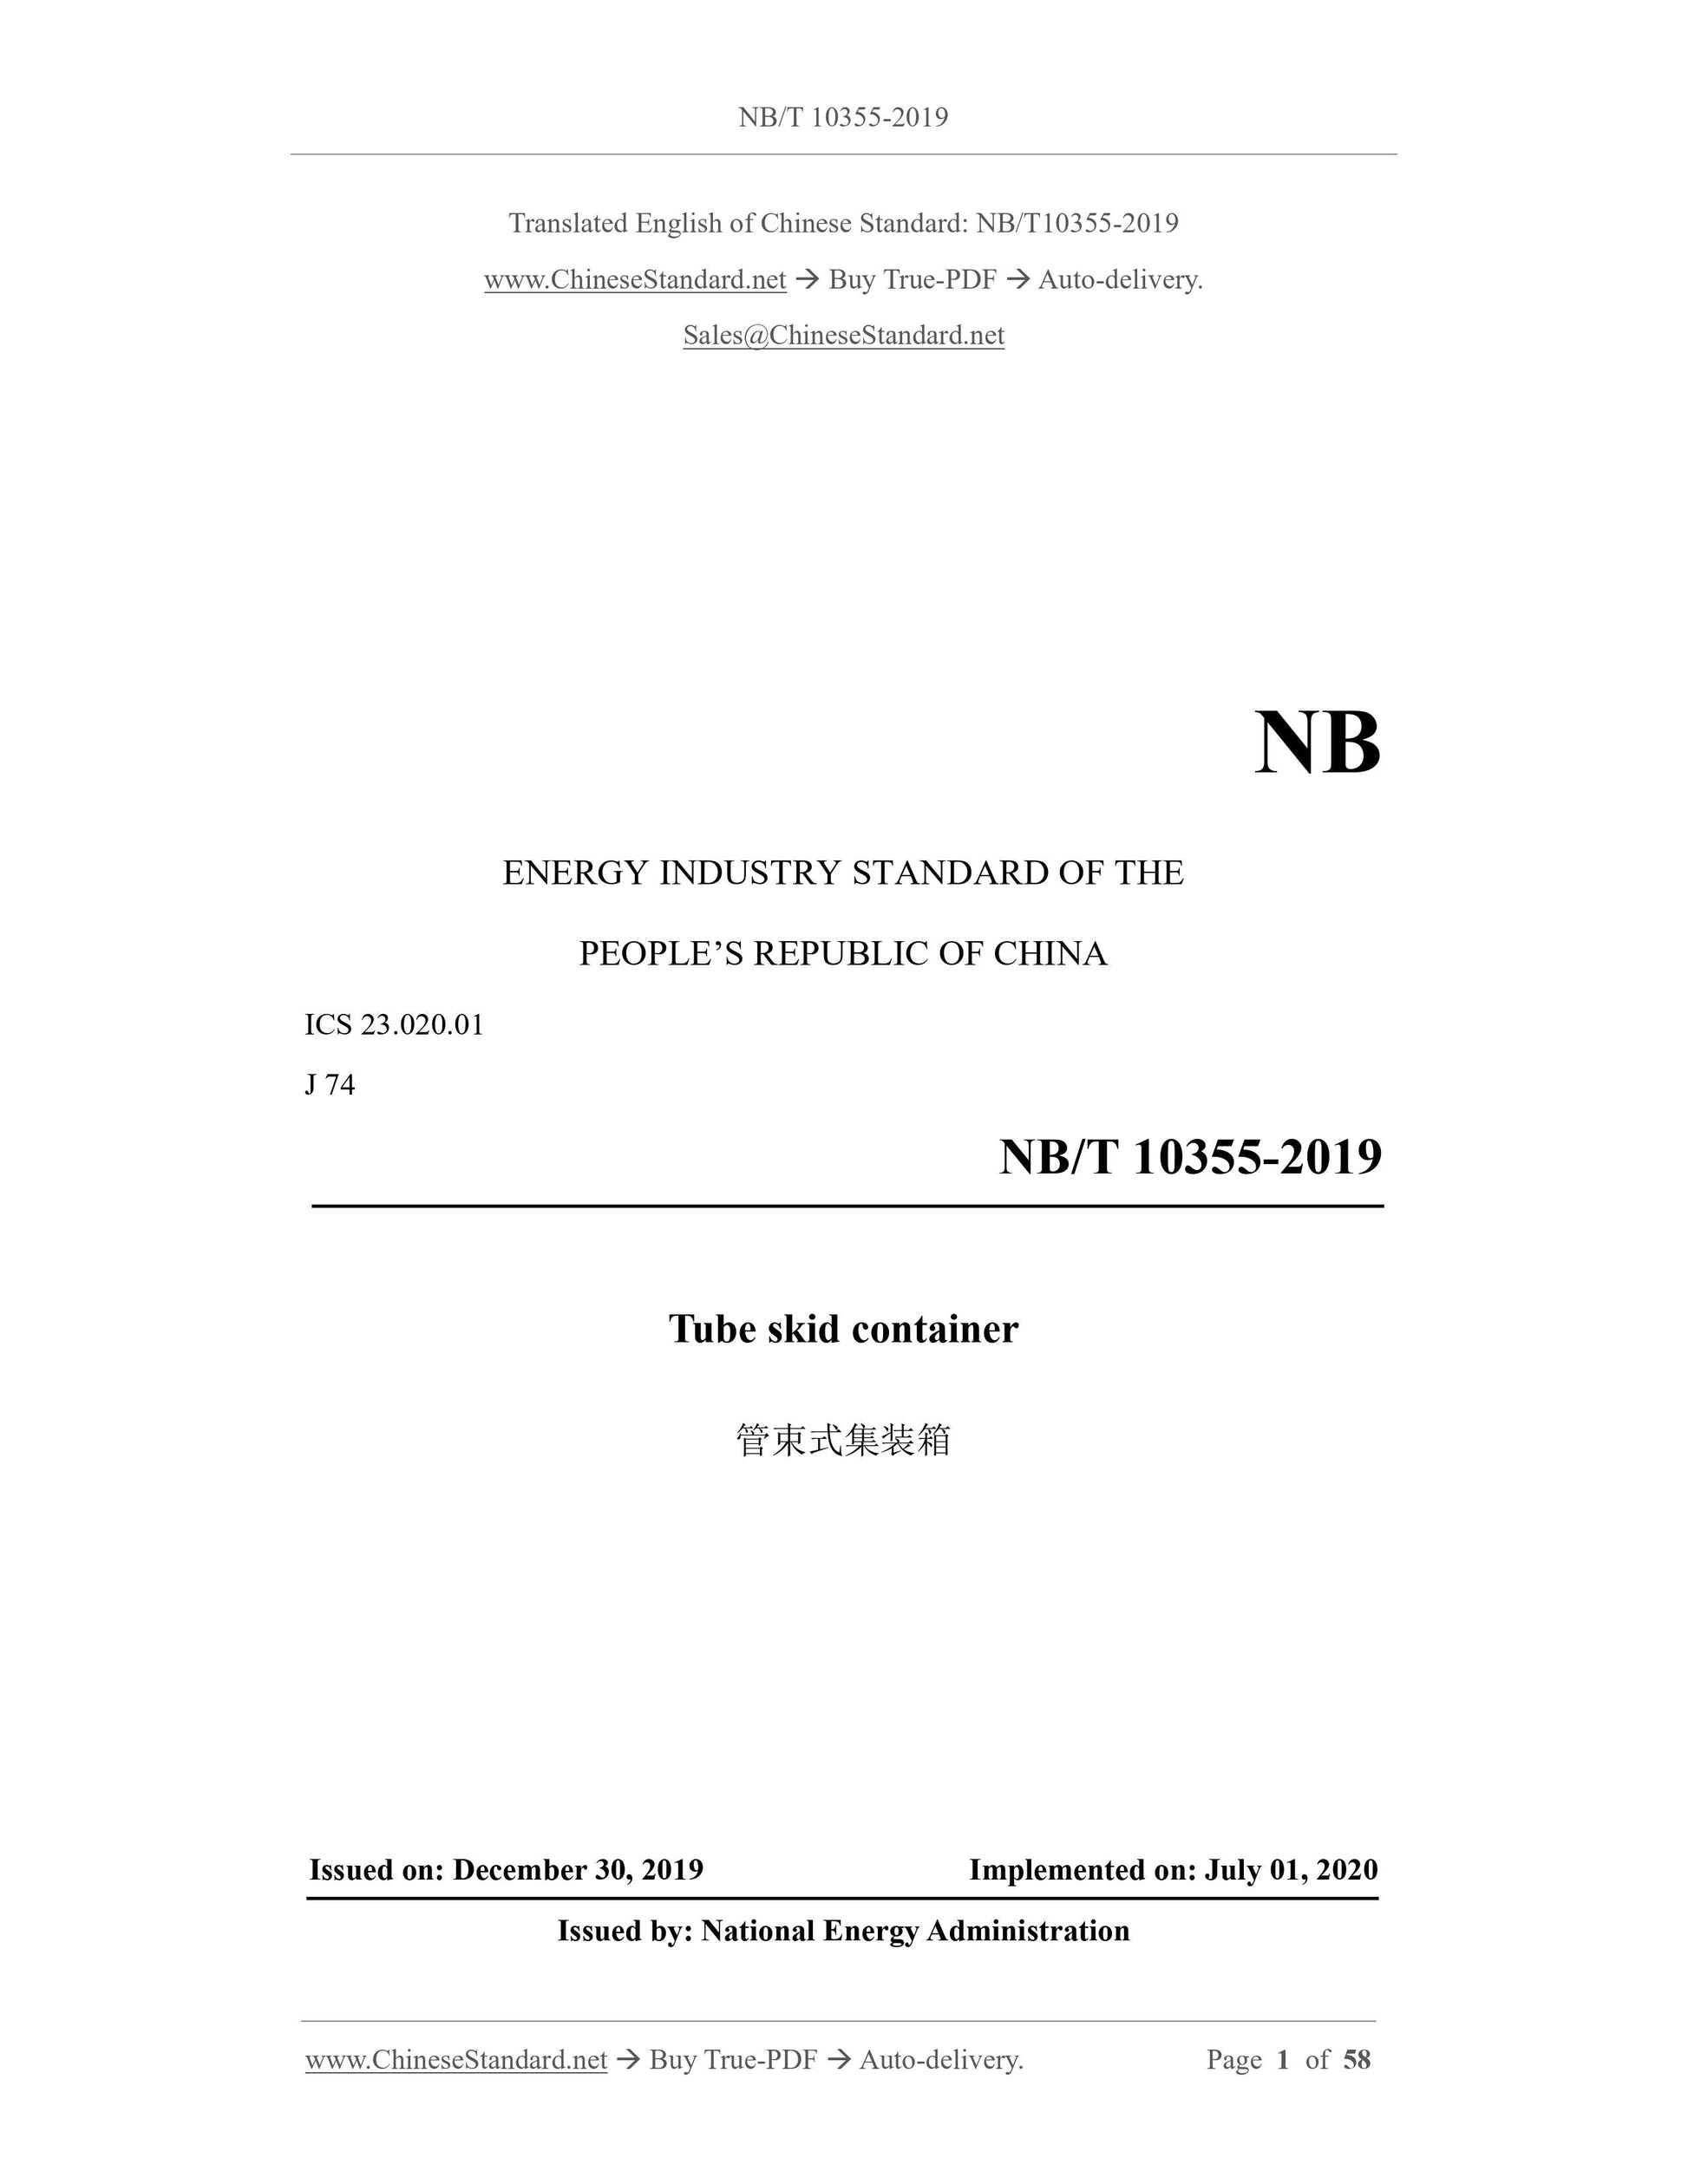 NB/T 10355-2019 Page 1